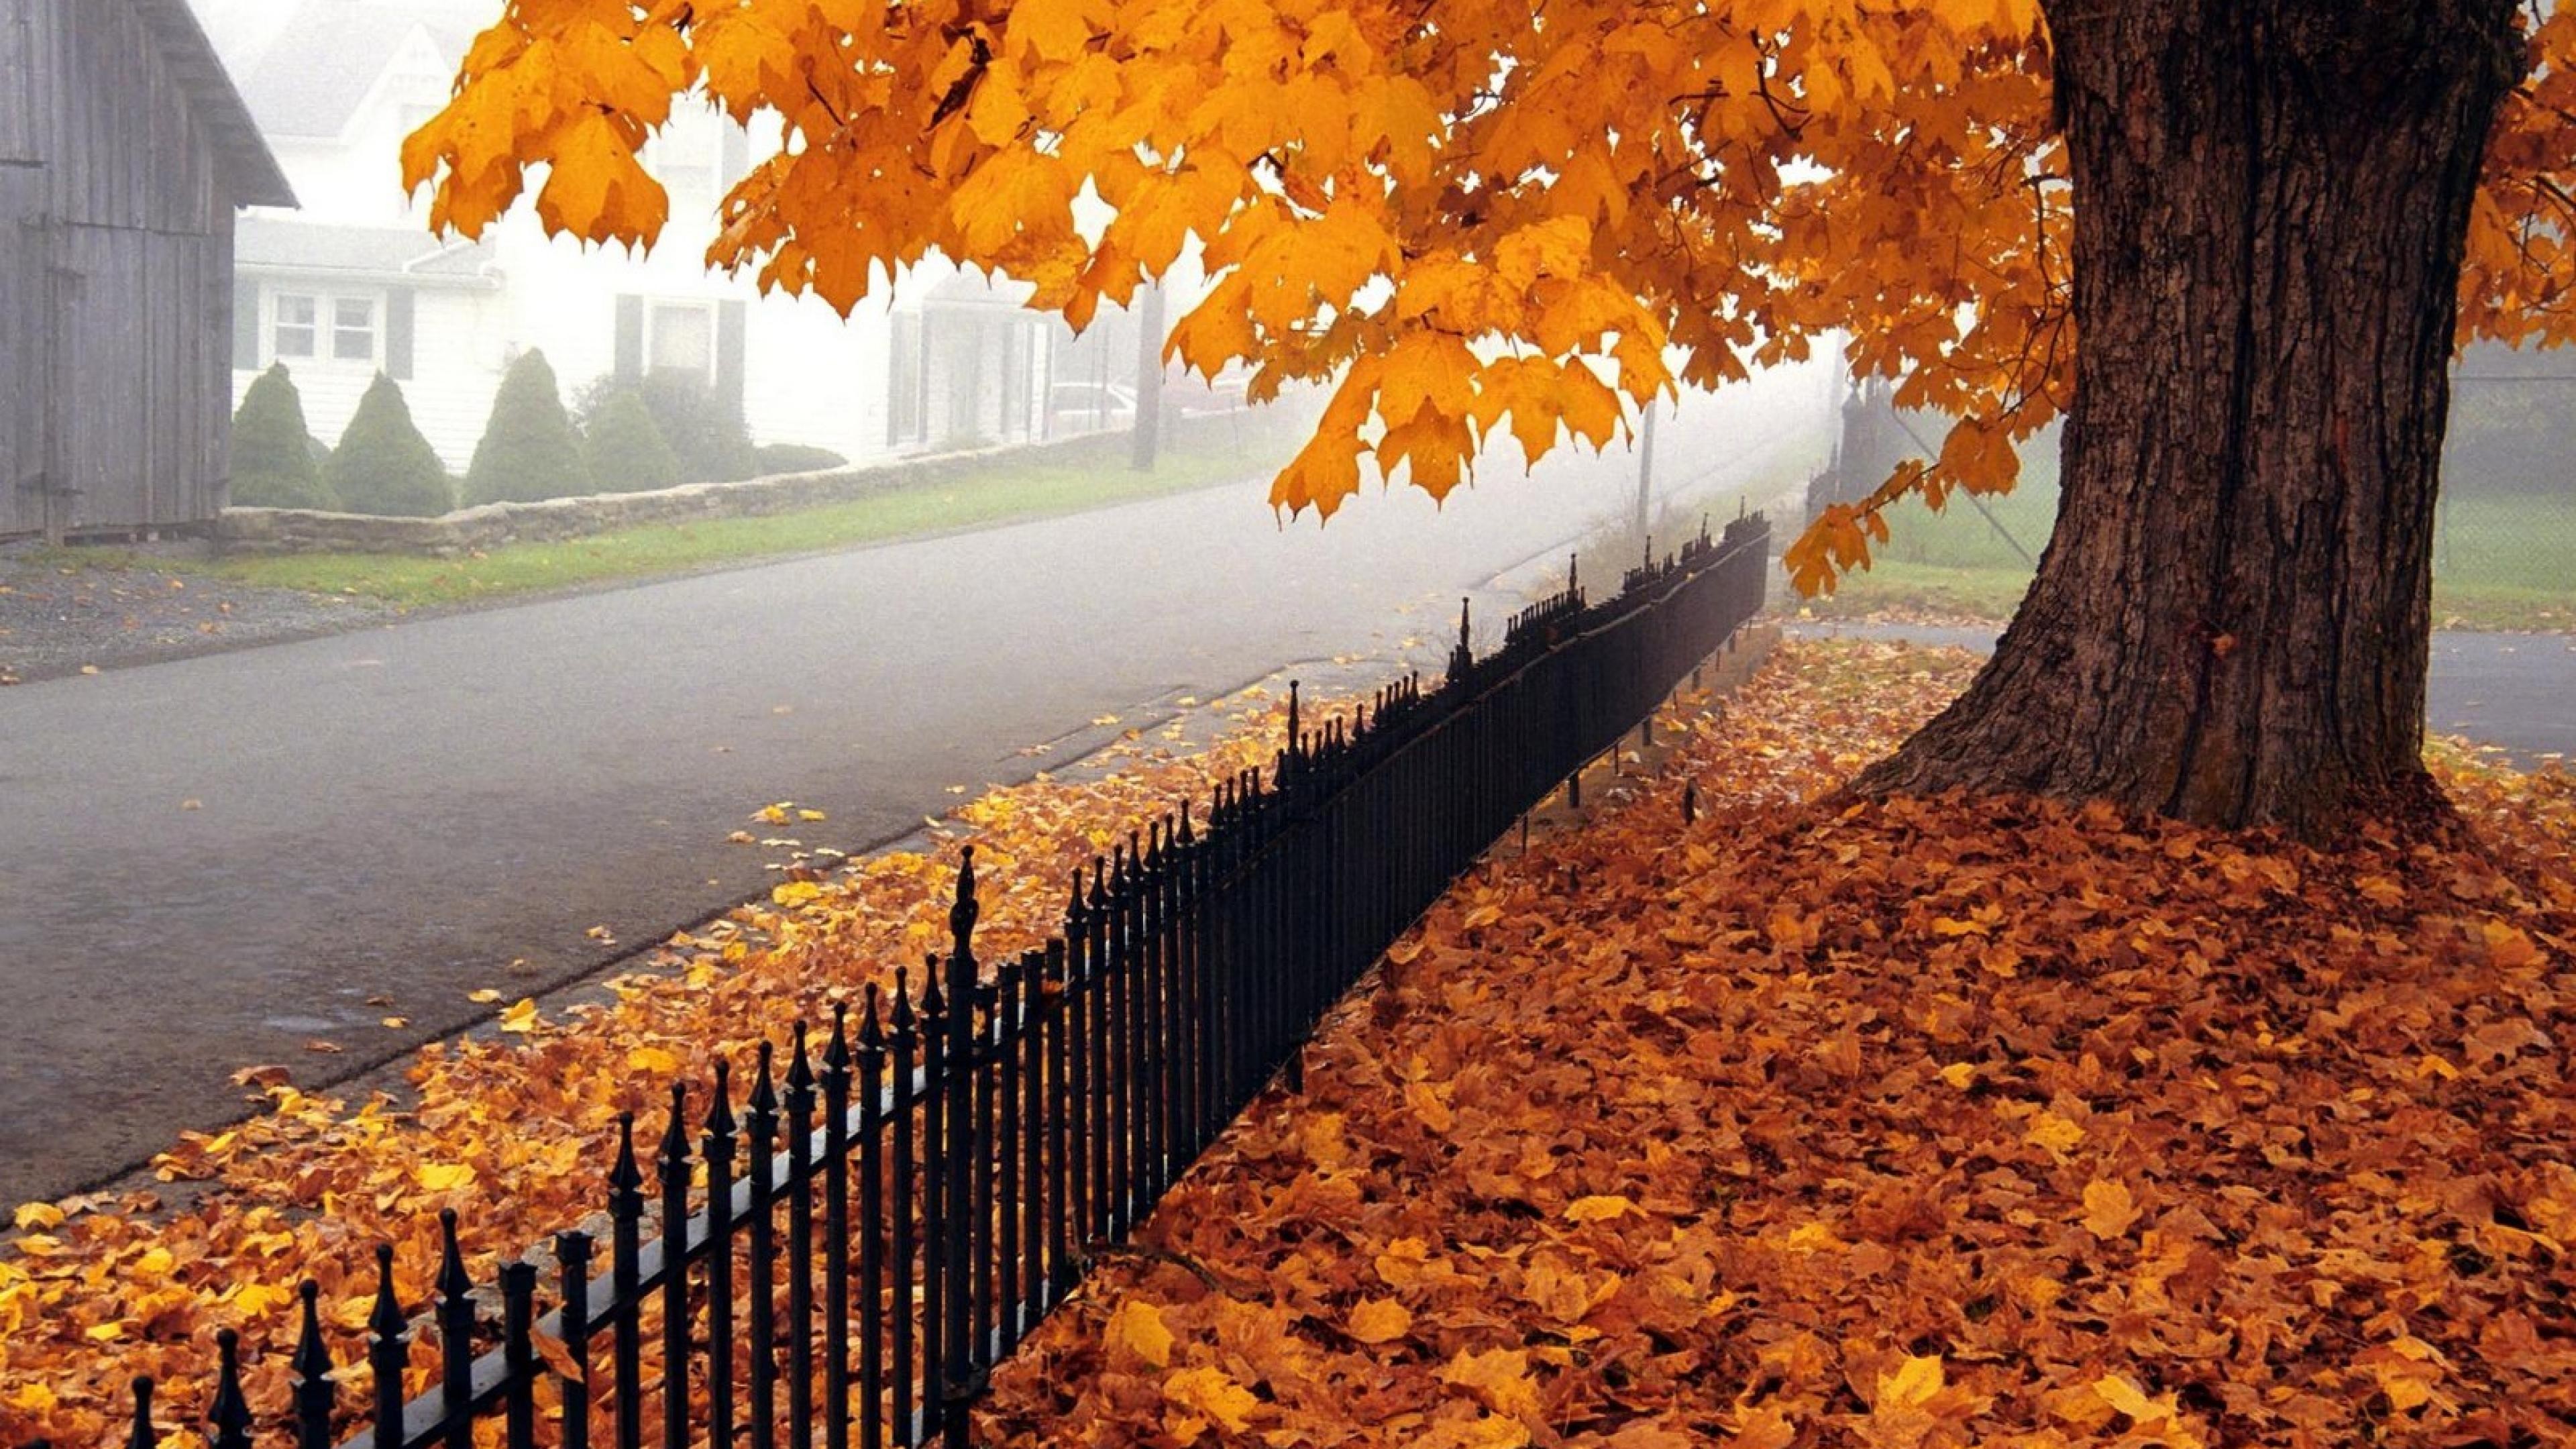 General 3840x2160 fall trees fence urban outdoors fallen leaves plants